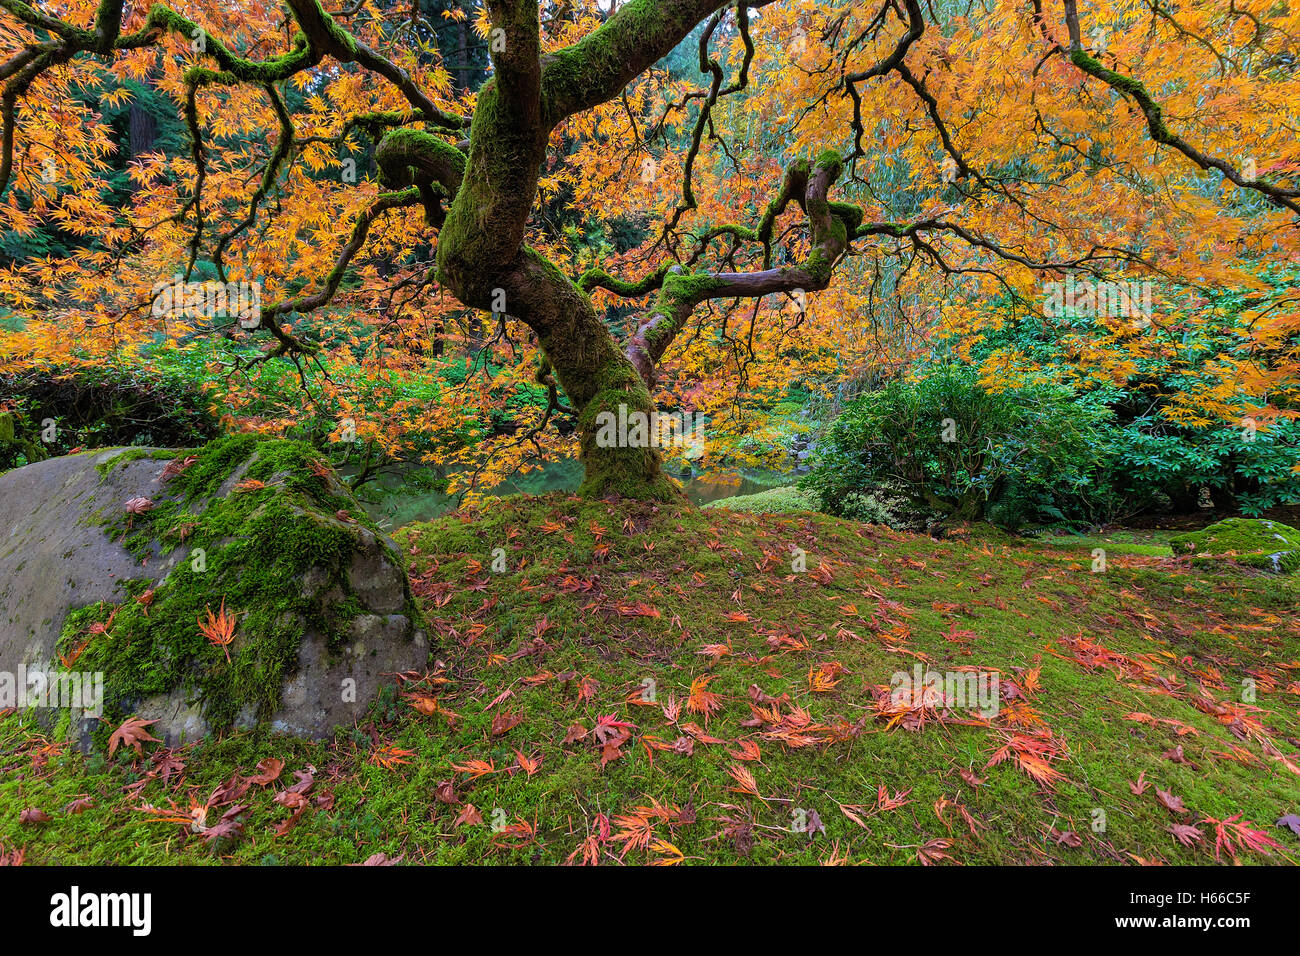 Under the Japanese Maple Tree at the Garden in Fall Season Stock Photo